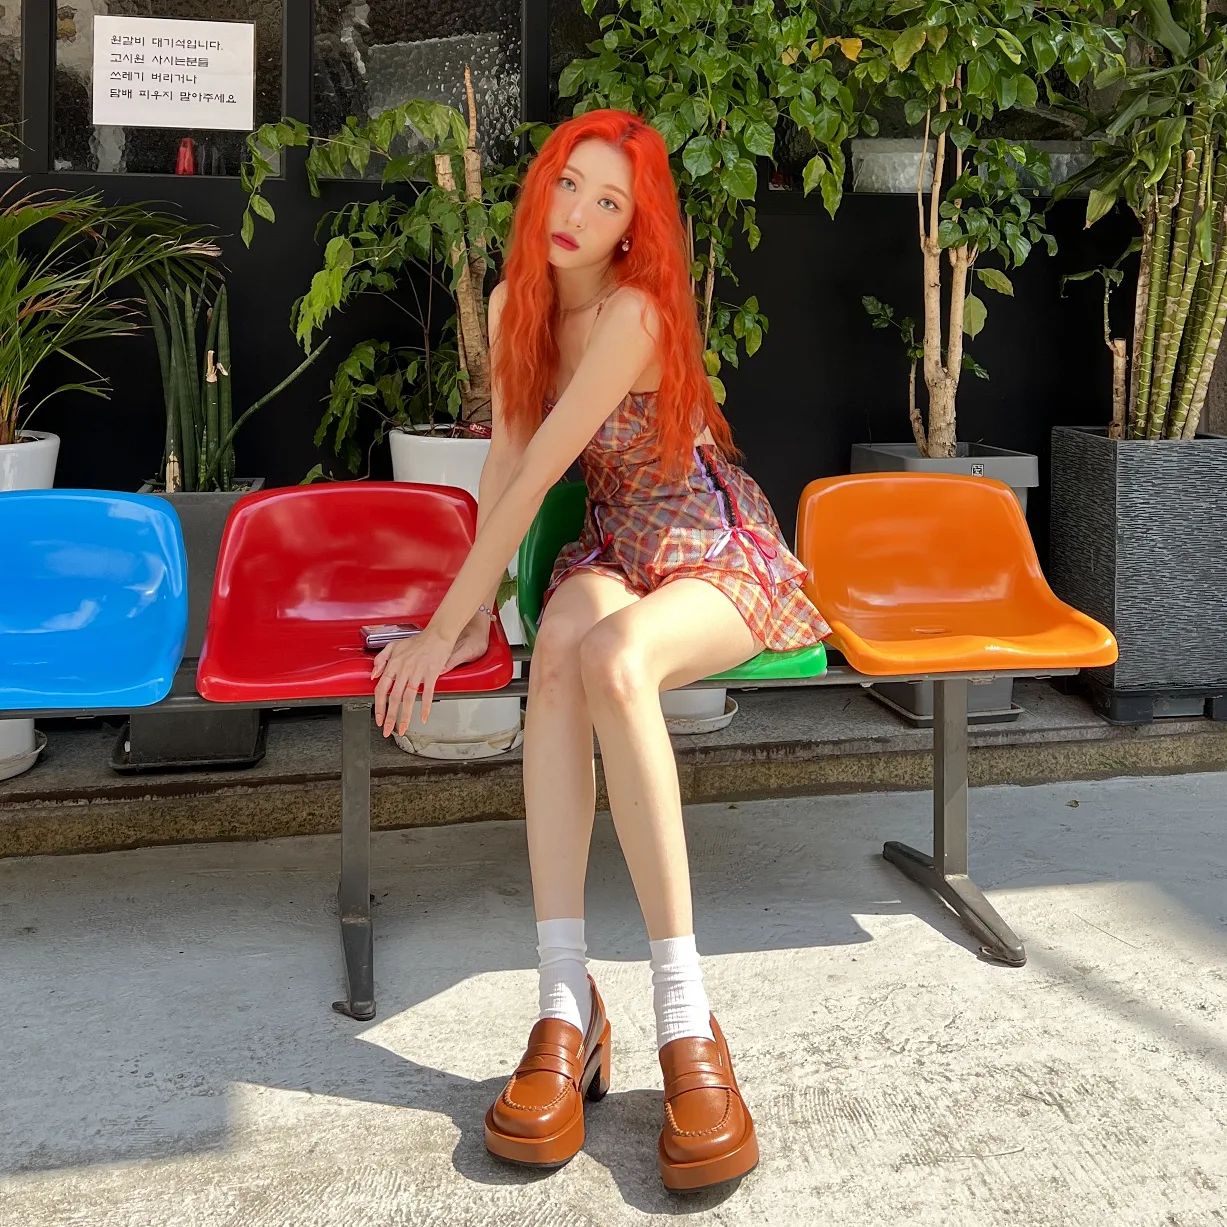 Sunmi, wearing a one-piece dress, is so bewitching in the waiting area of a ribs restaurant